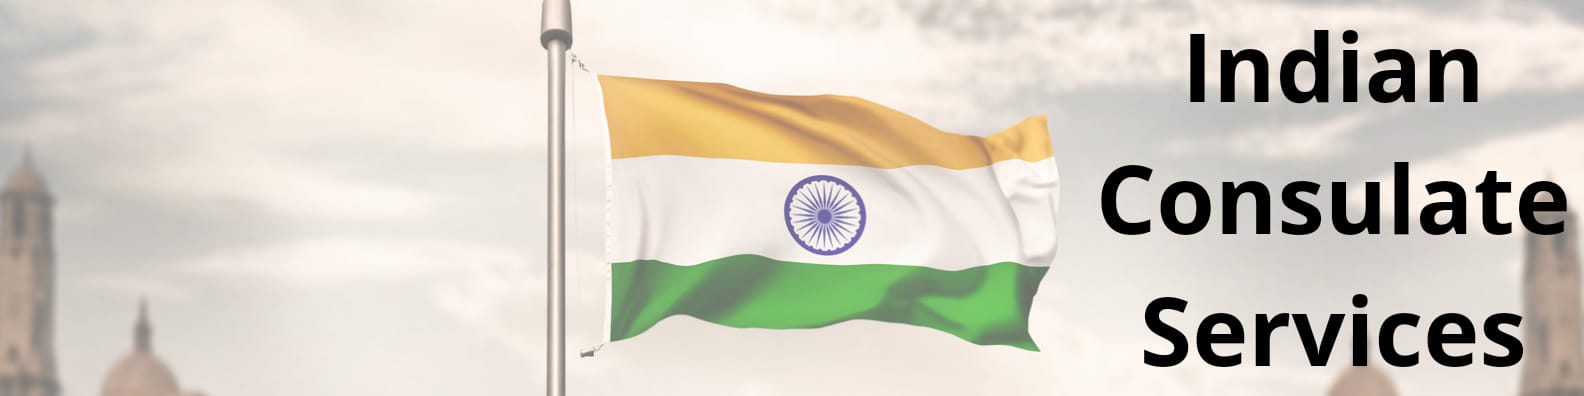 Indian Consulate Services, Miscellaneous service, Swift Immigration